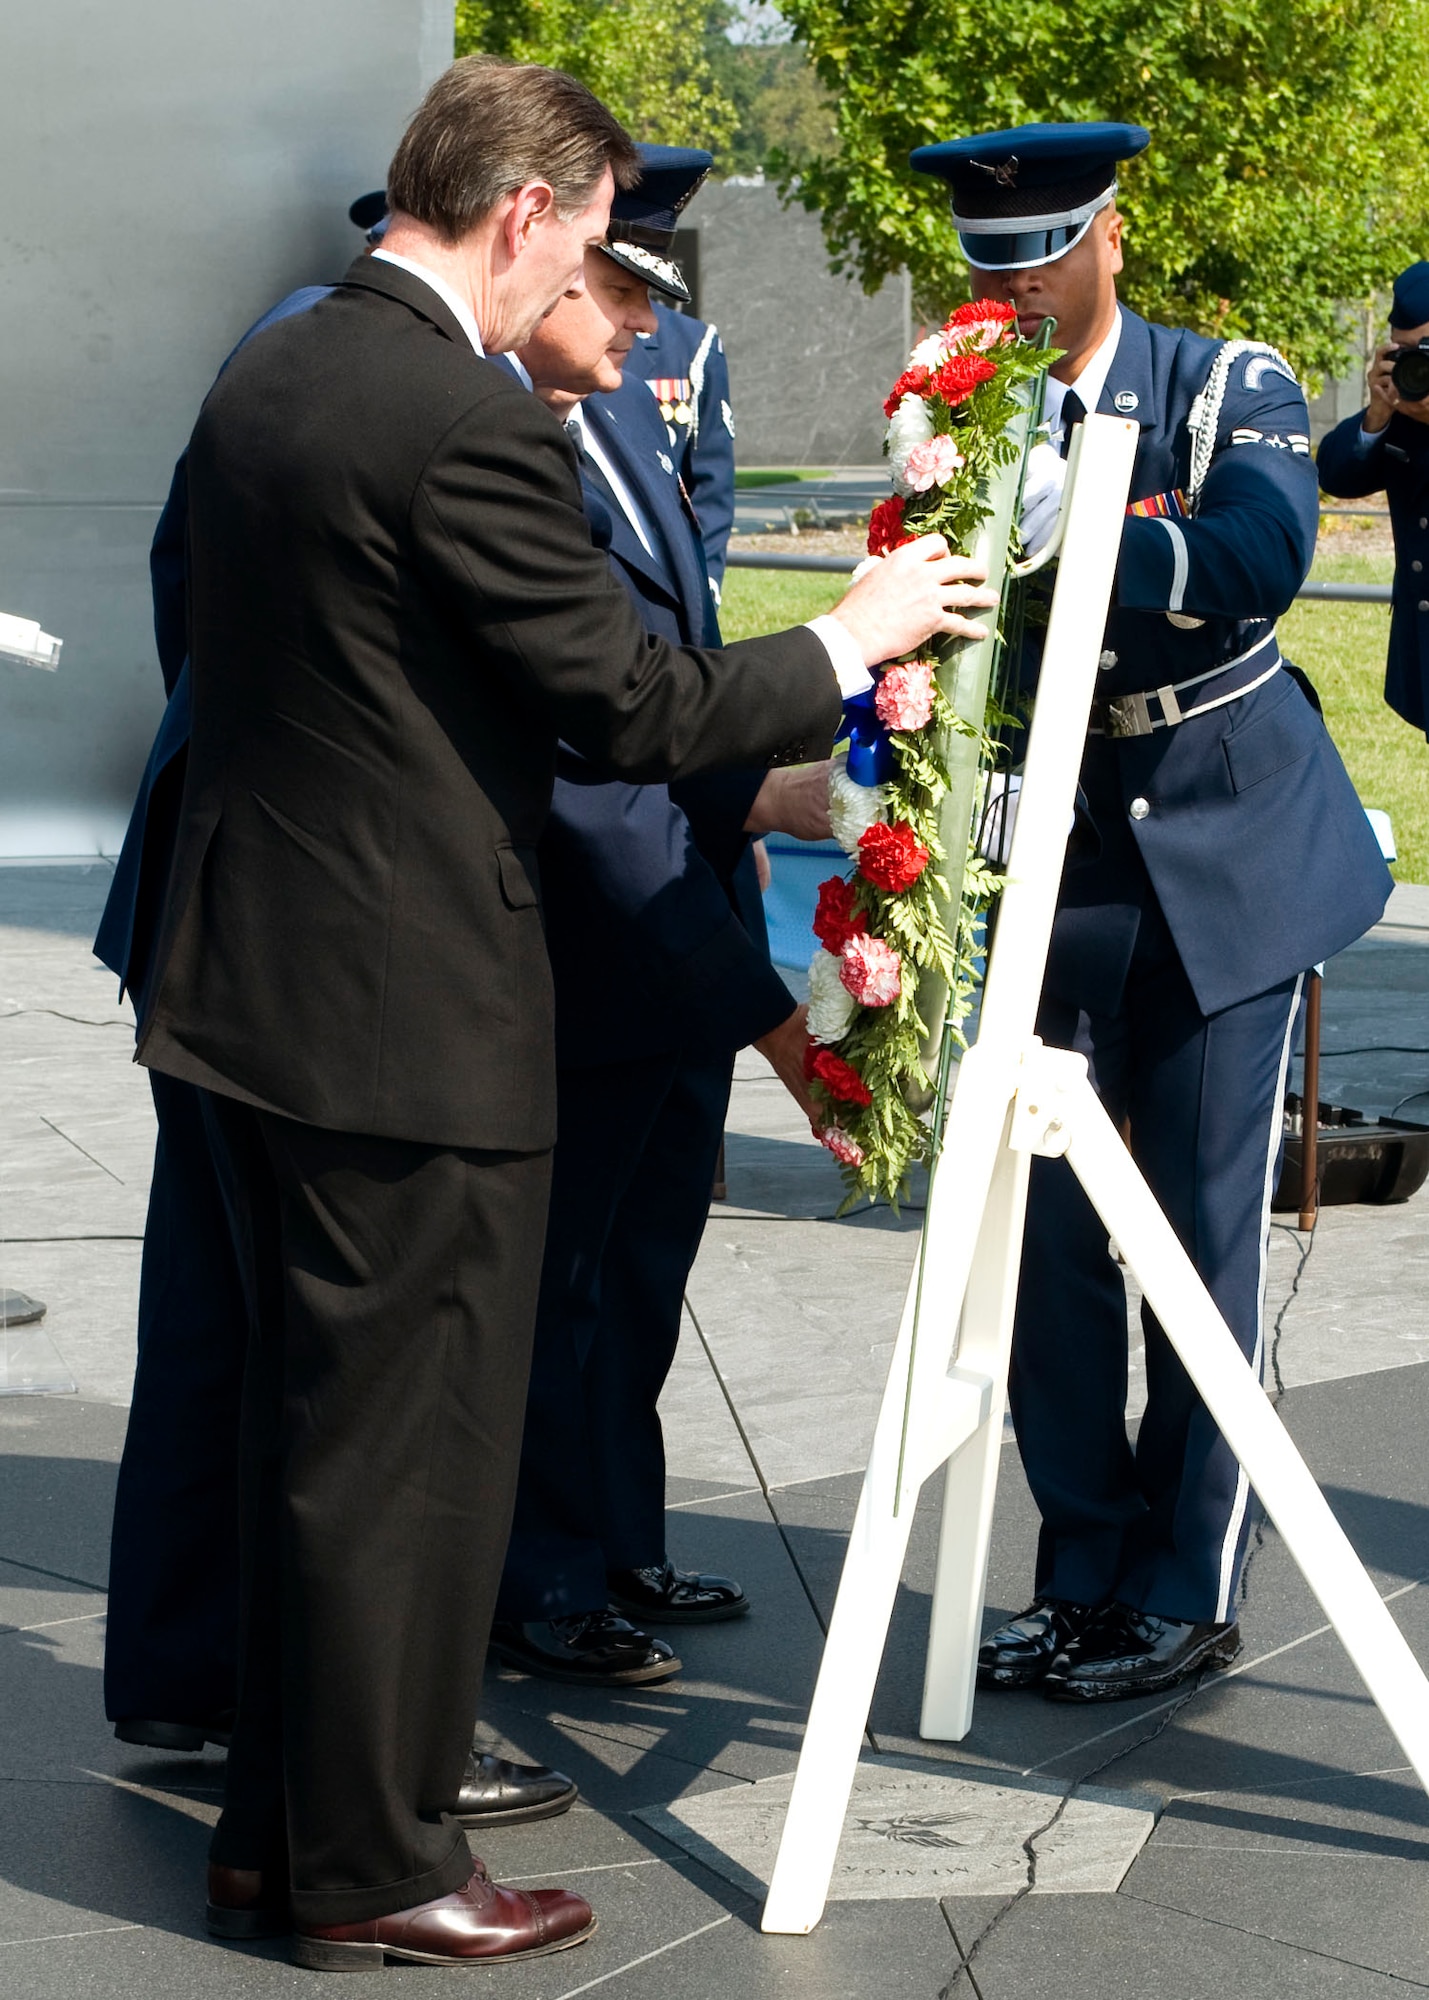 In observance of the 60th Anniversary of the Air Force Office of Special Investigations a wreath is placed at the Air Force Memorial Aug. 1. Positioning the wreath are (l to r) Mr. Douglas Thomas, AFOSI Executive Director, Command Chief Master Sgt. Chris Redmond , AFOSI Command Chief, Brig. Gen. Dana Simmons, AFOSI commander and an Airman from the Air Force Honor Guard. (U.S. Air Force photo/Mike Hastings)